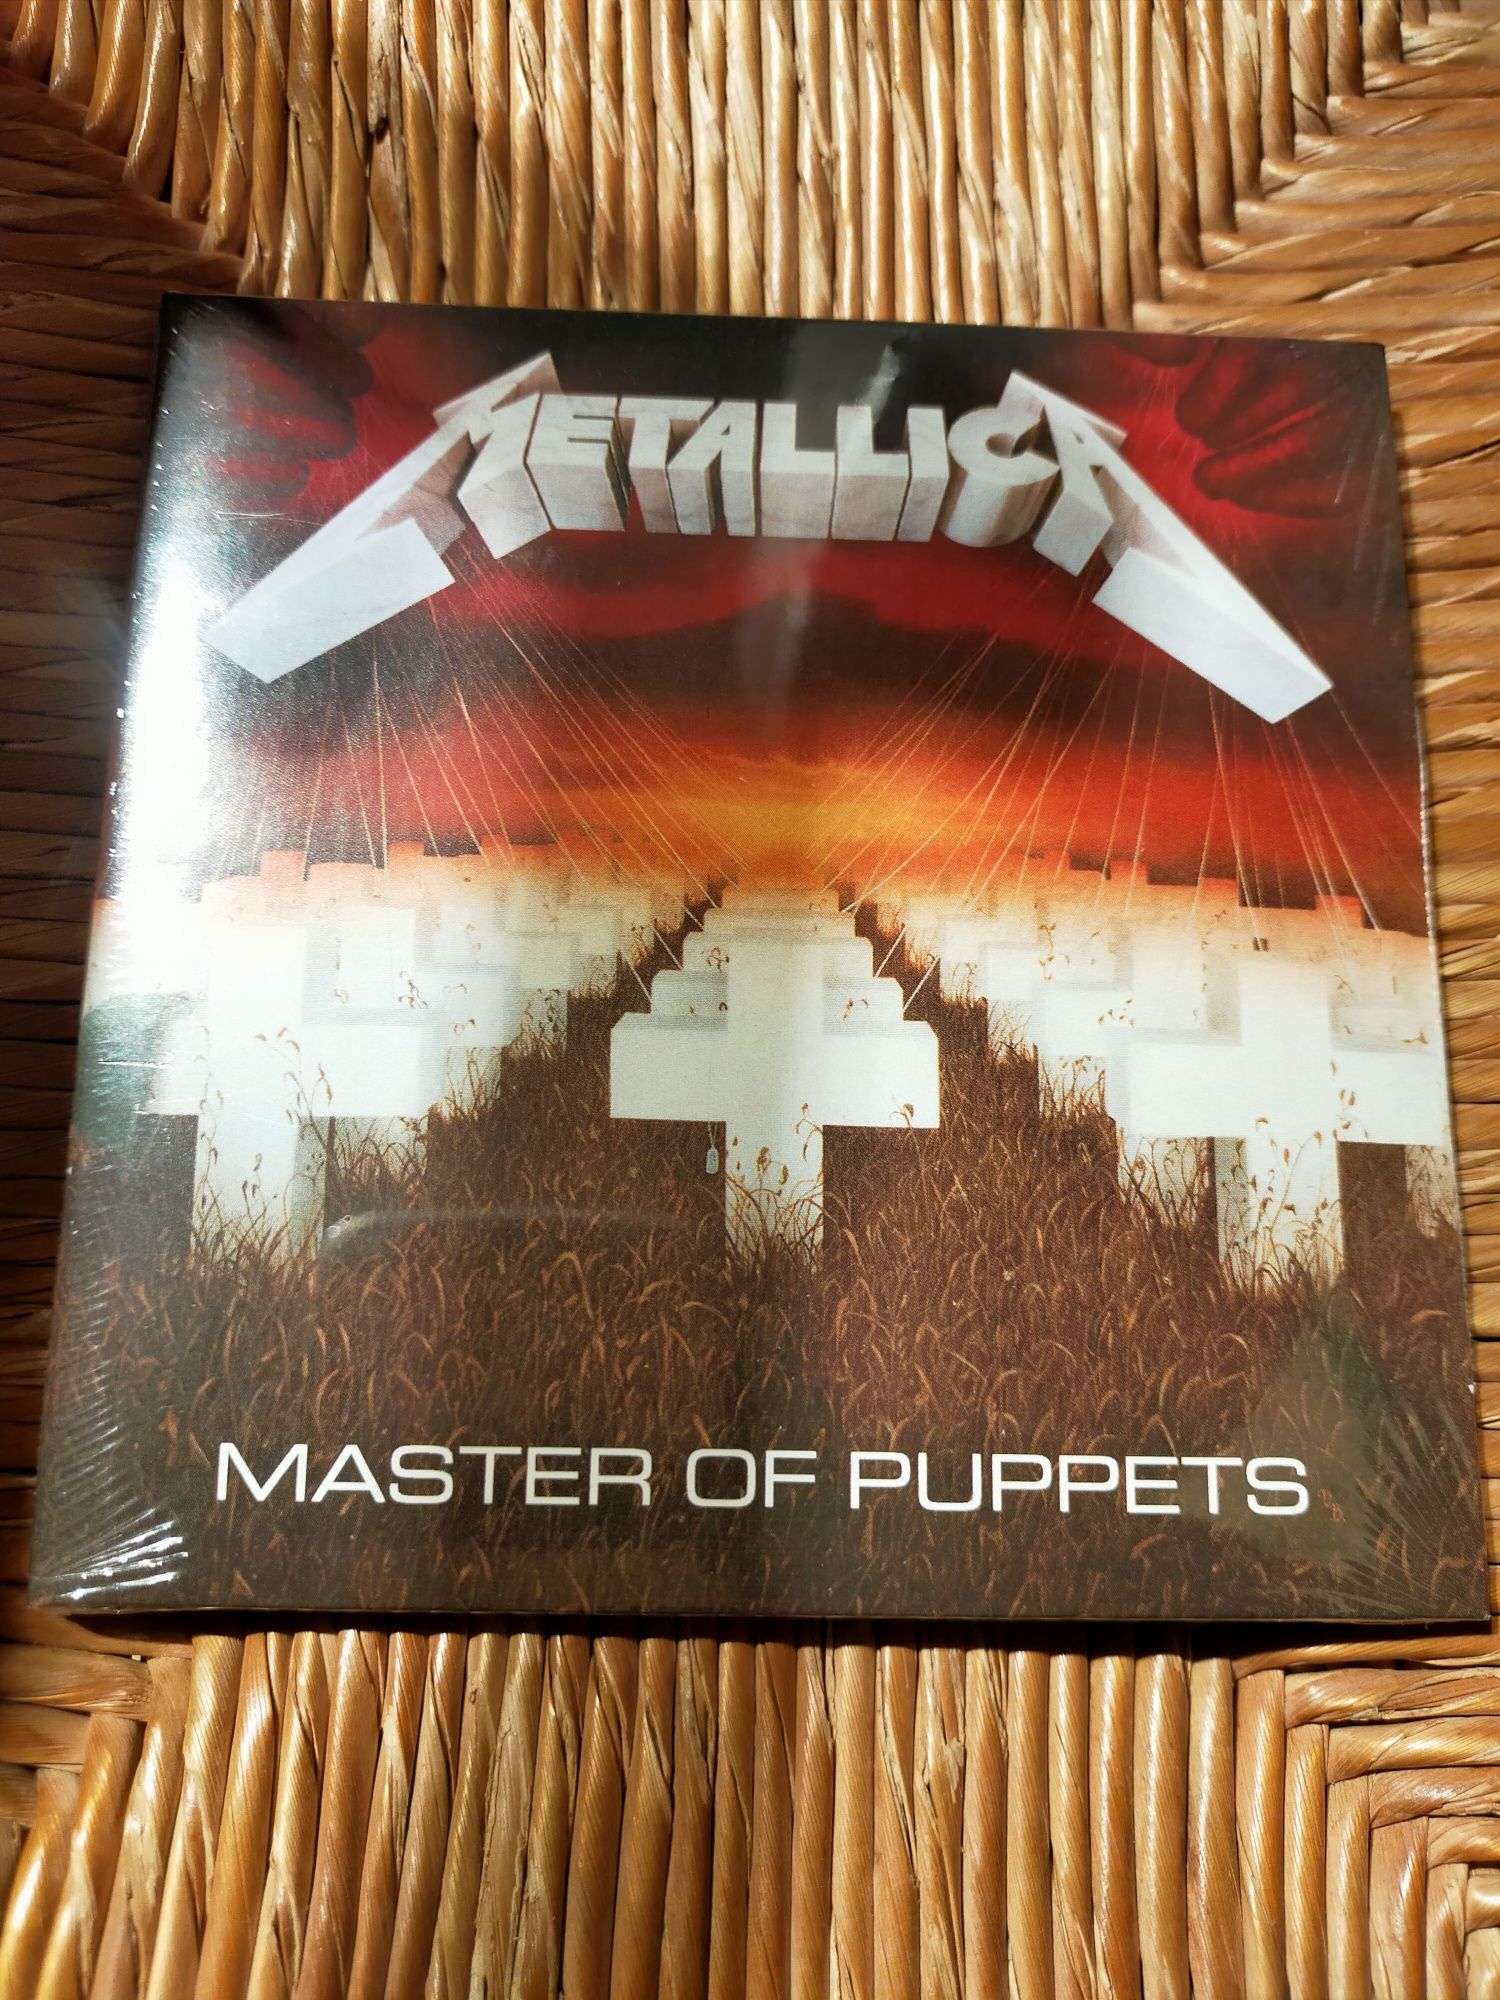 Metallica Master Od Puppets Remastered CD